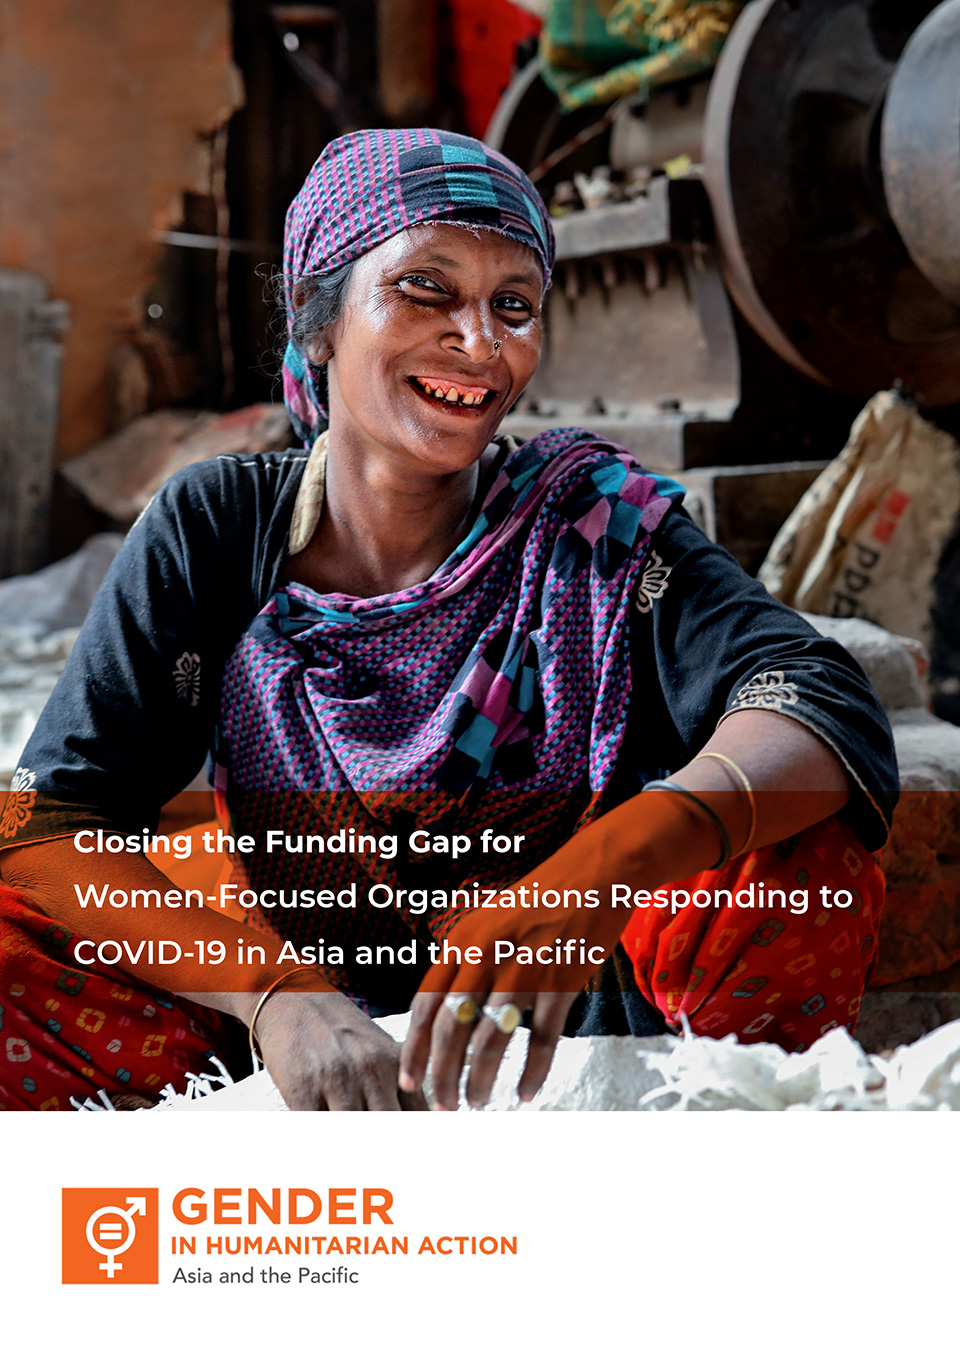 Closing the Funding Gap for Women-Focused Organizations Responding to COVID-19 in Asia and the Pacific